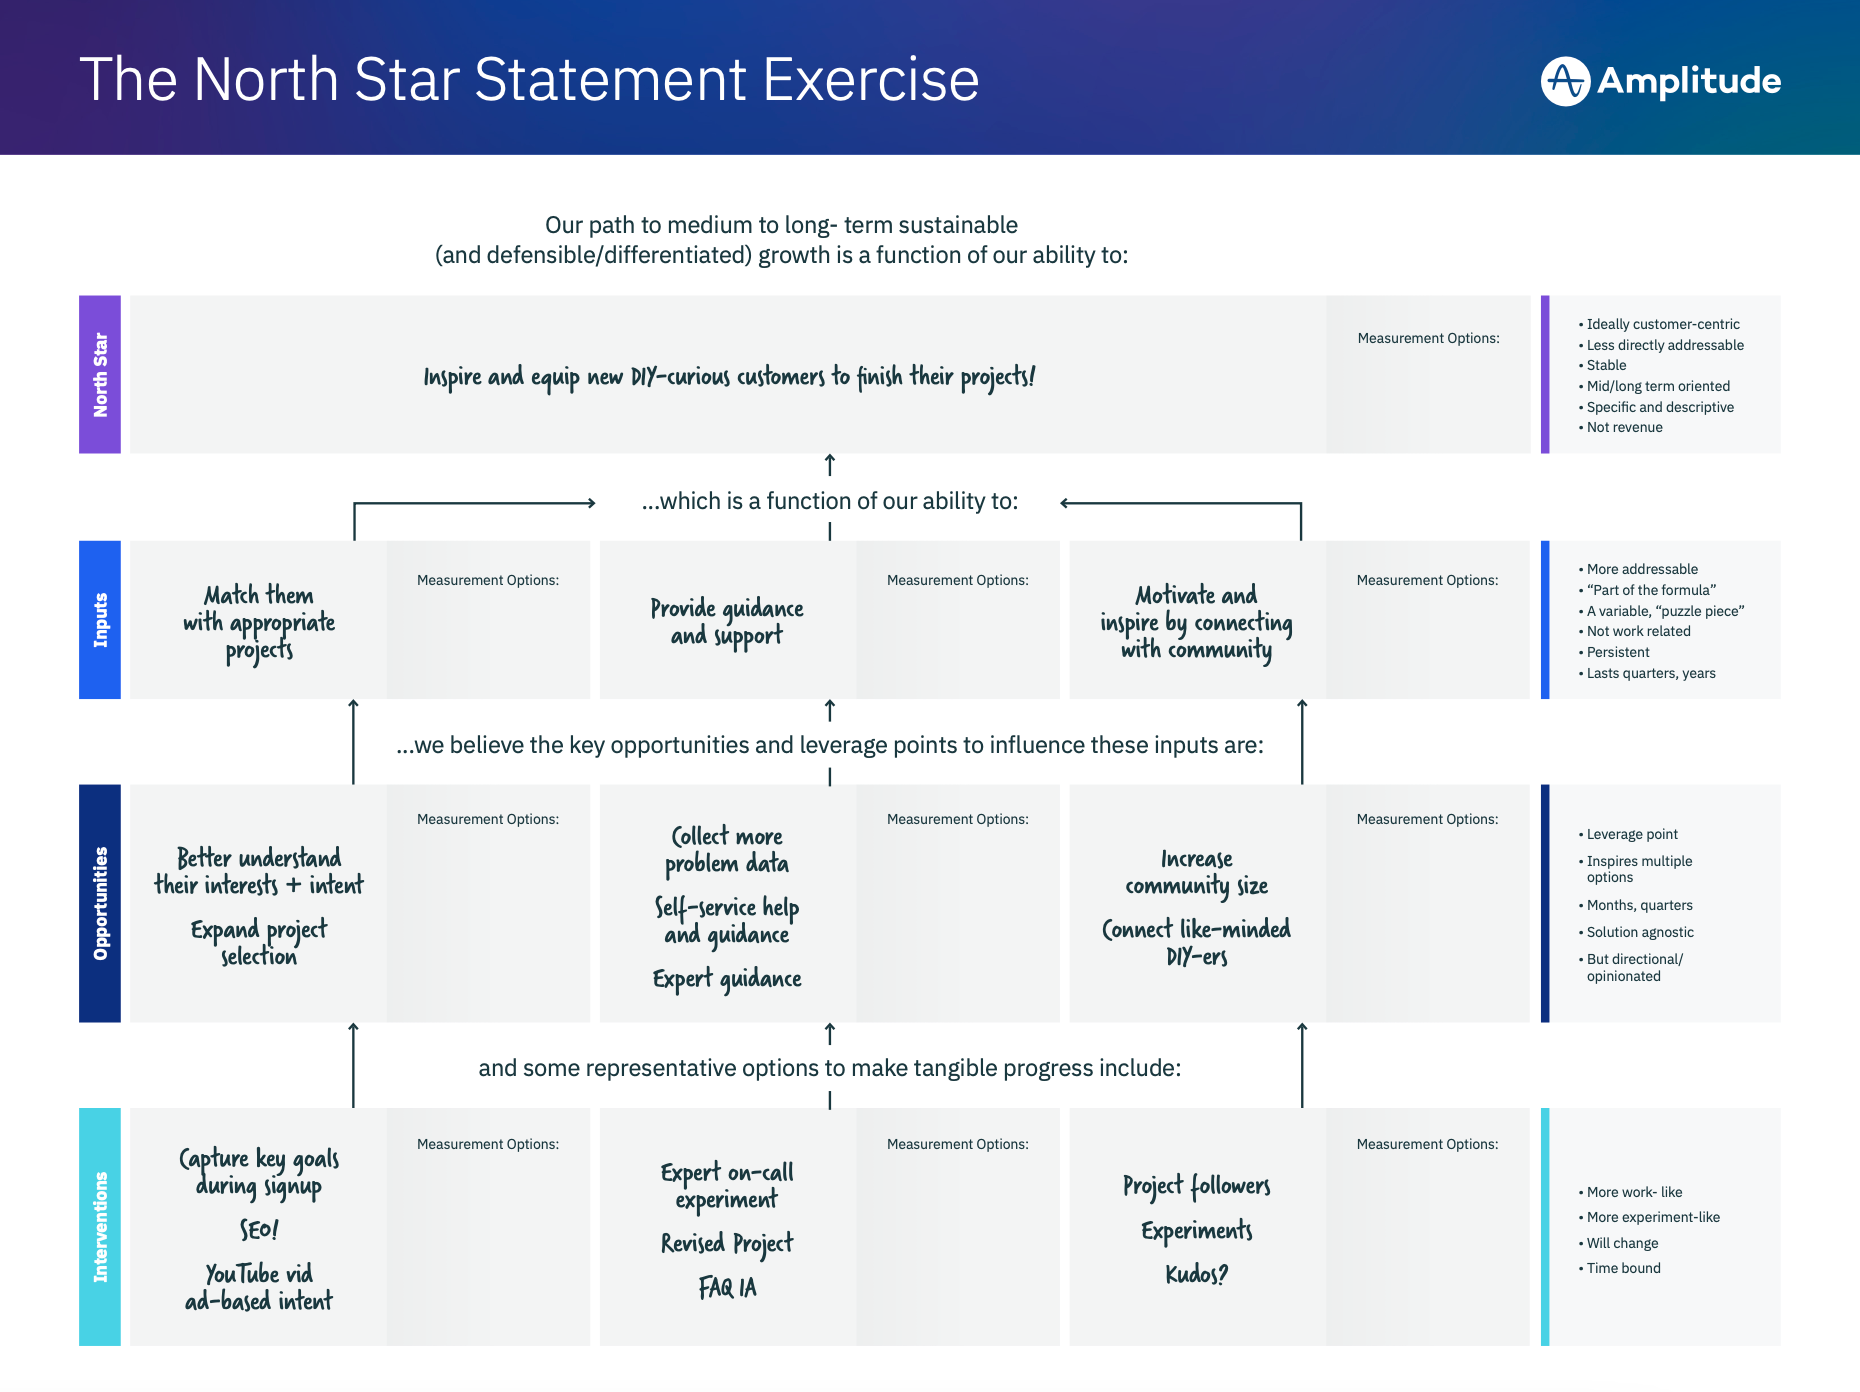 Completed North Star Statement exercise